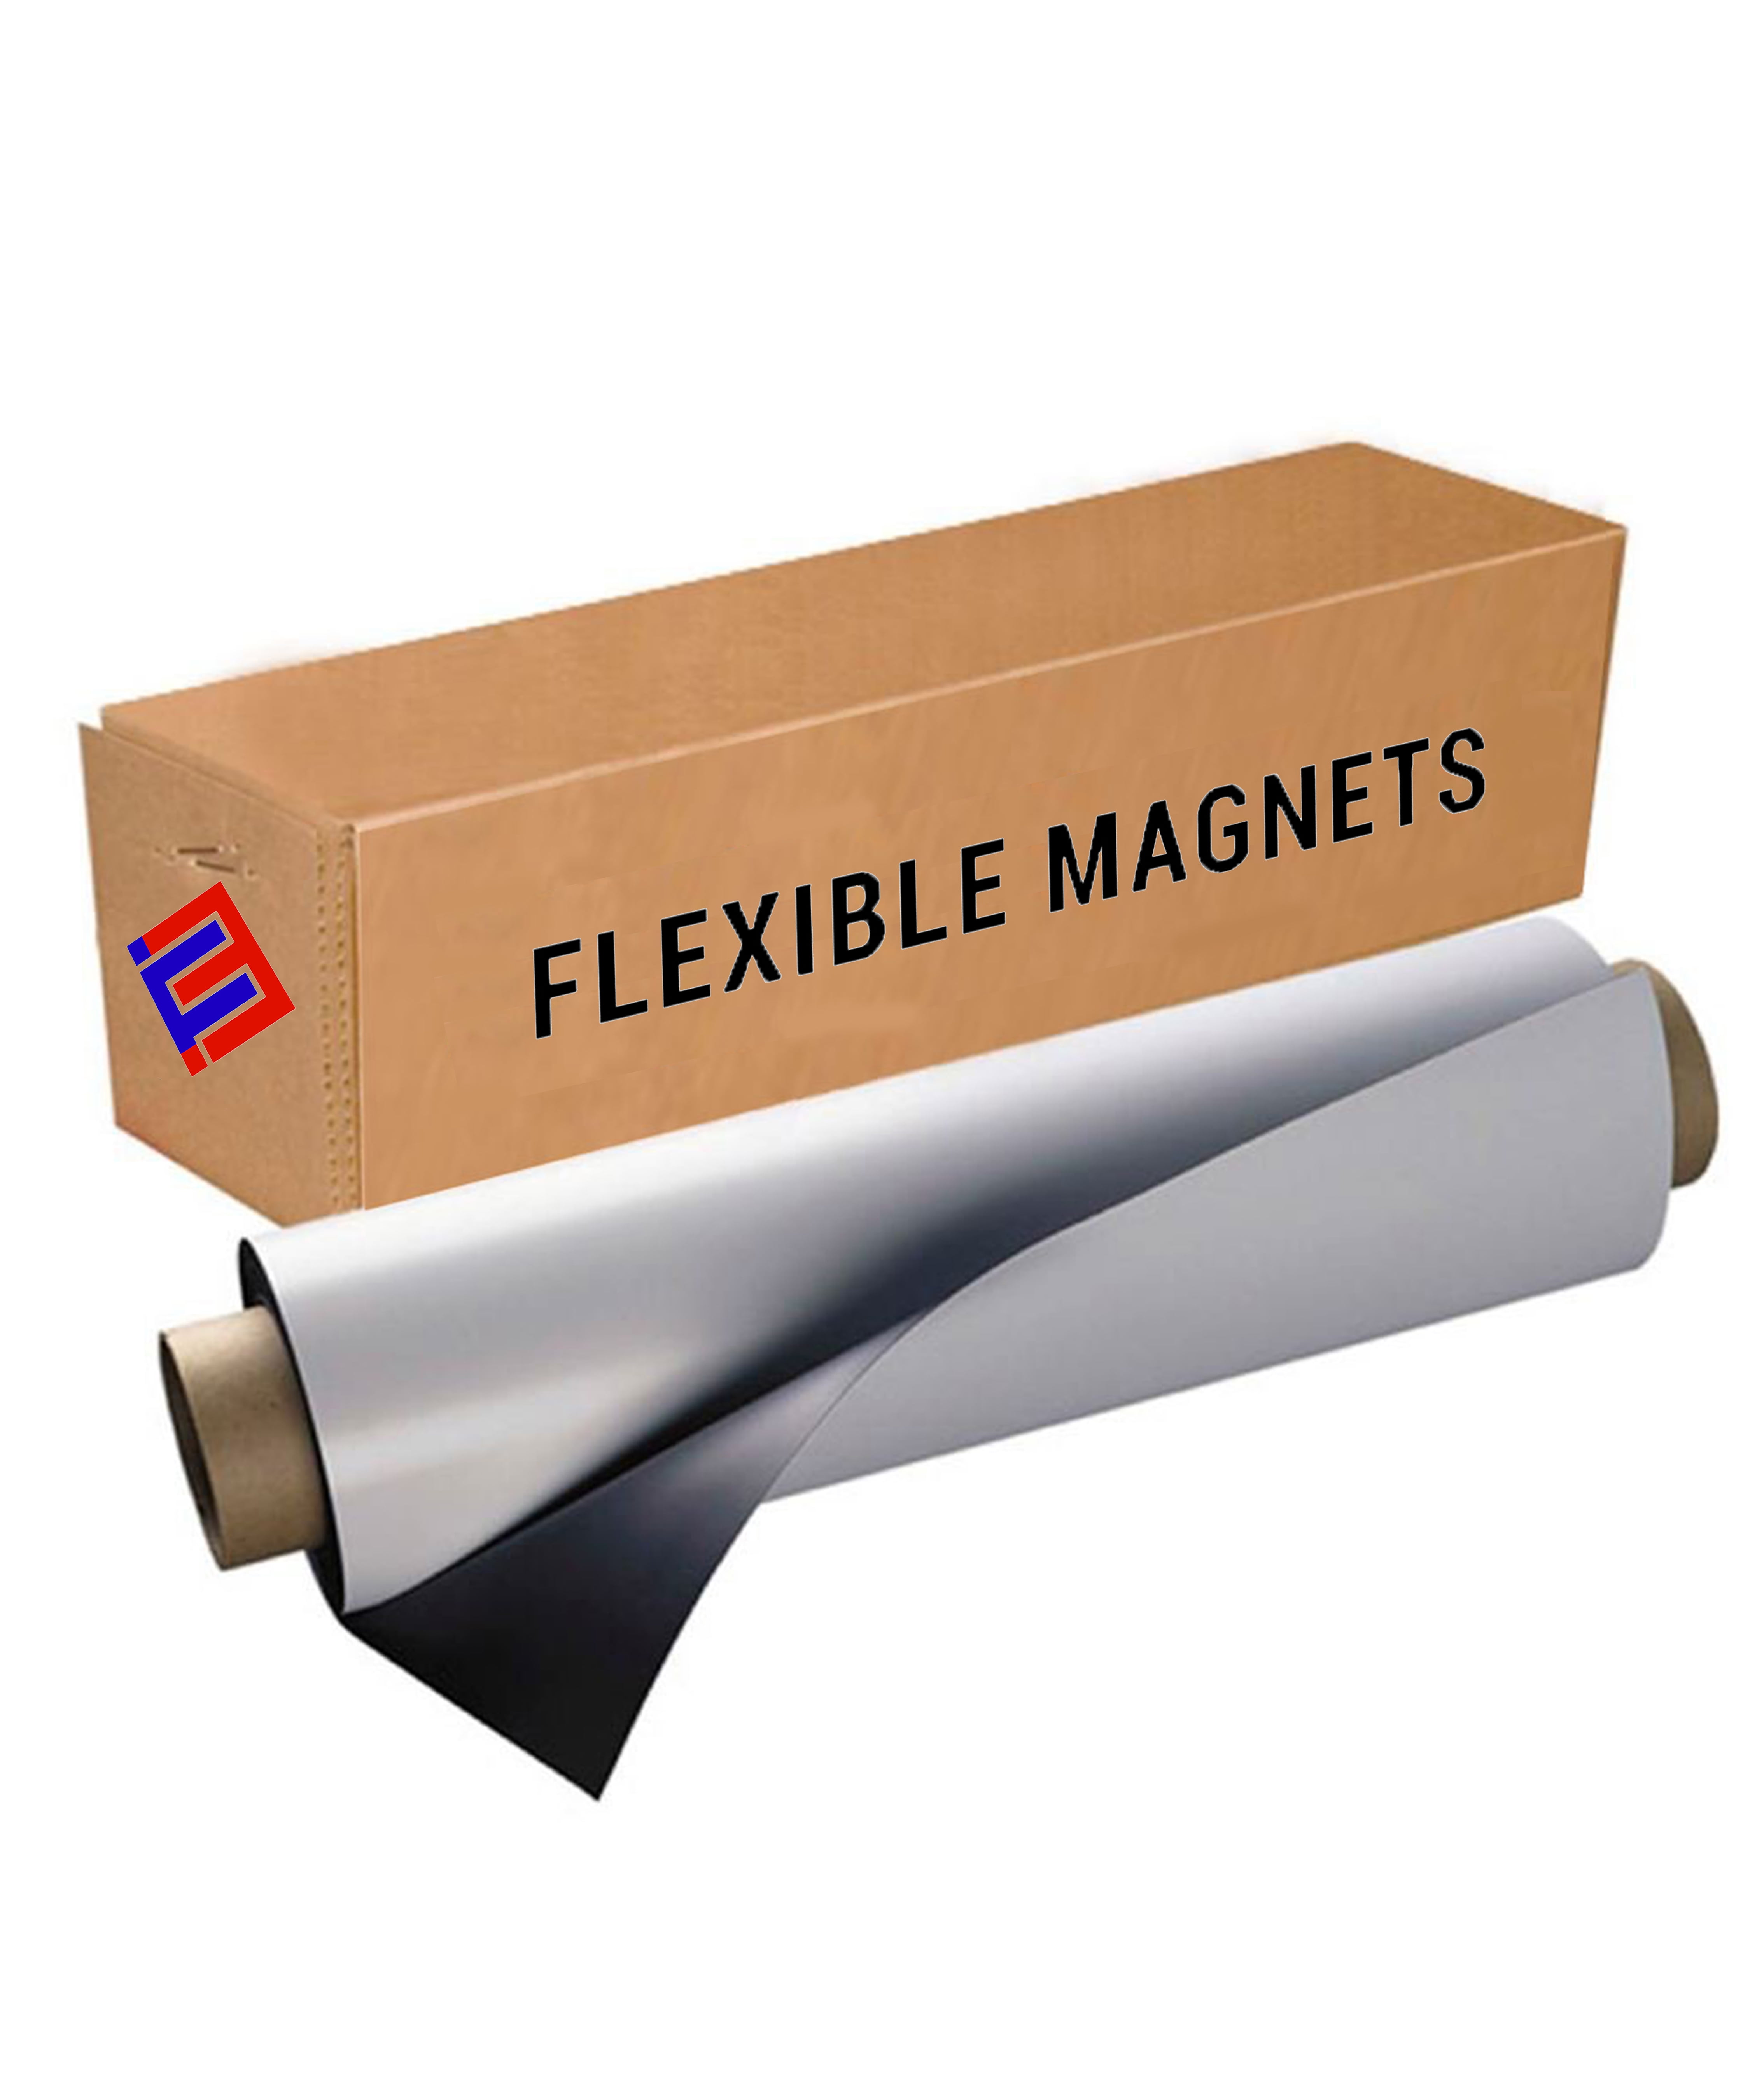 24" x 4' roll flexible 30 mil Magnet GOOD QUALITY Magnetic sheet for Art 